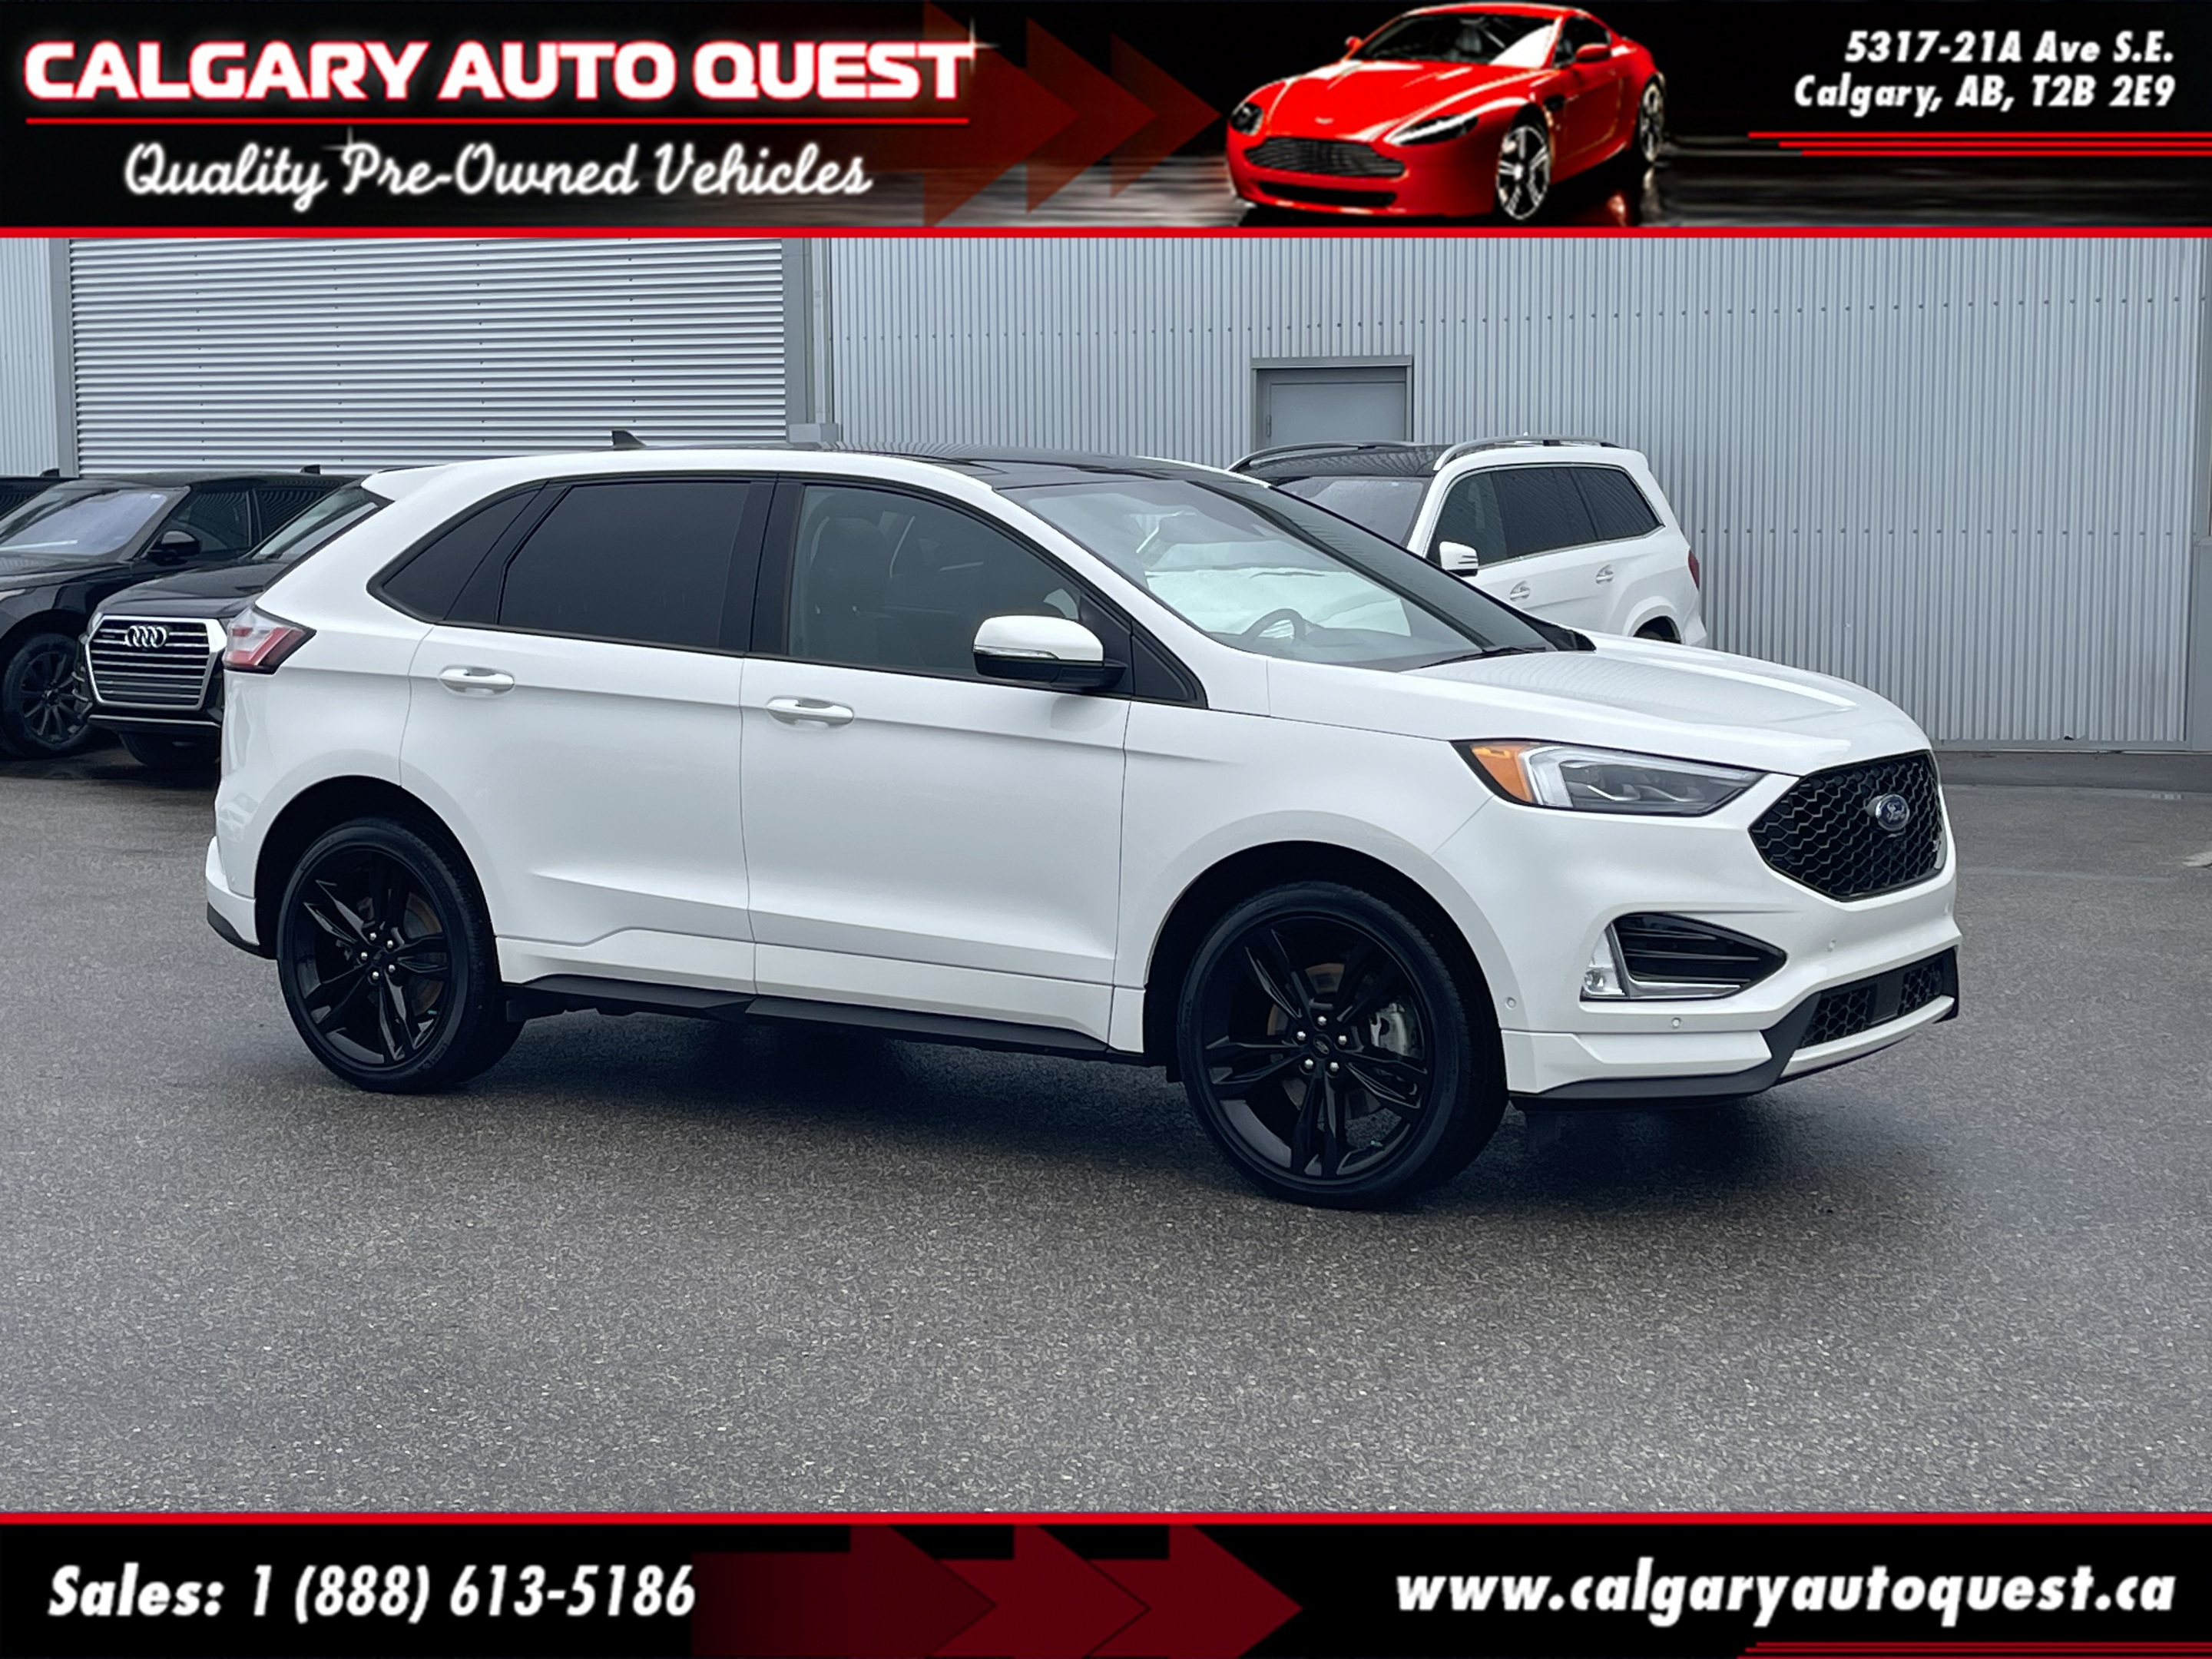 2020 Ford Edge ST AWD NAVI // B.CAM // PANOROOF // 2.7L ECOBOOST